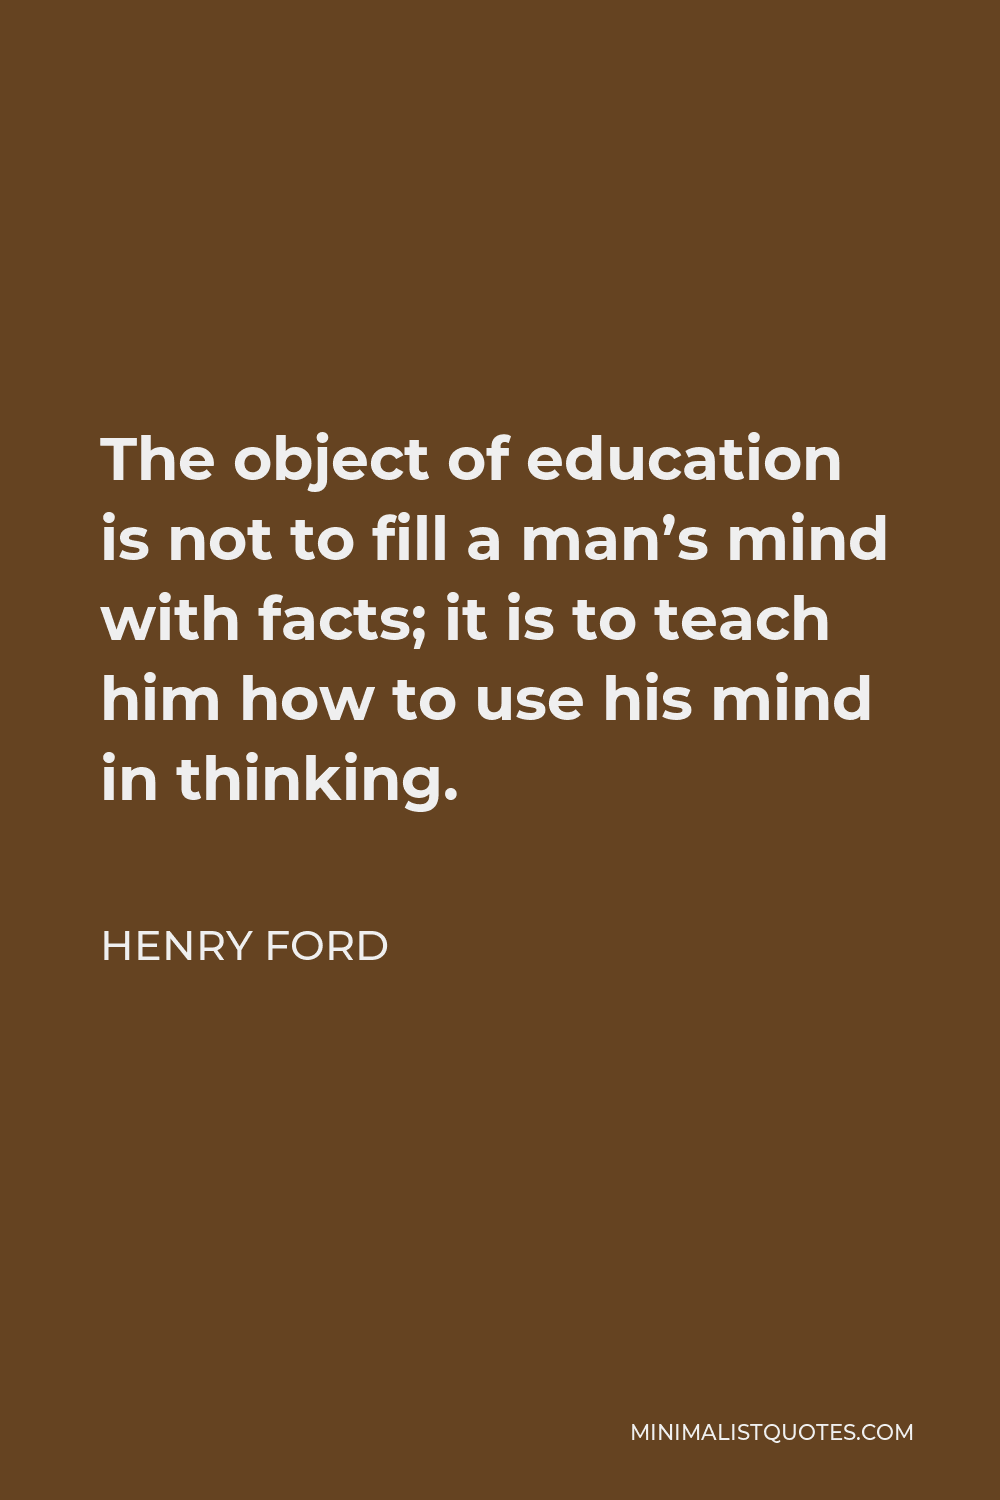 Henry Ford Quote - The object of education is not to fill a man’s mind with facts; it is to teach him how to use his mind in thinking.